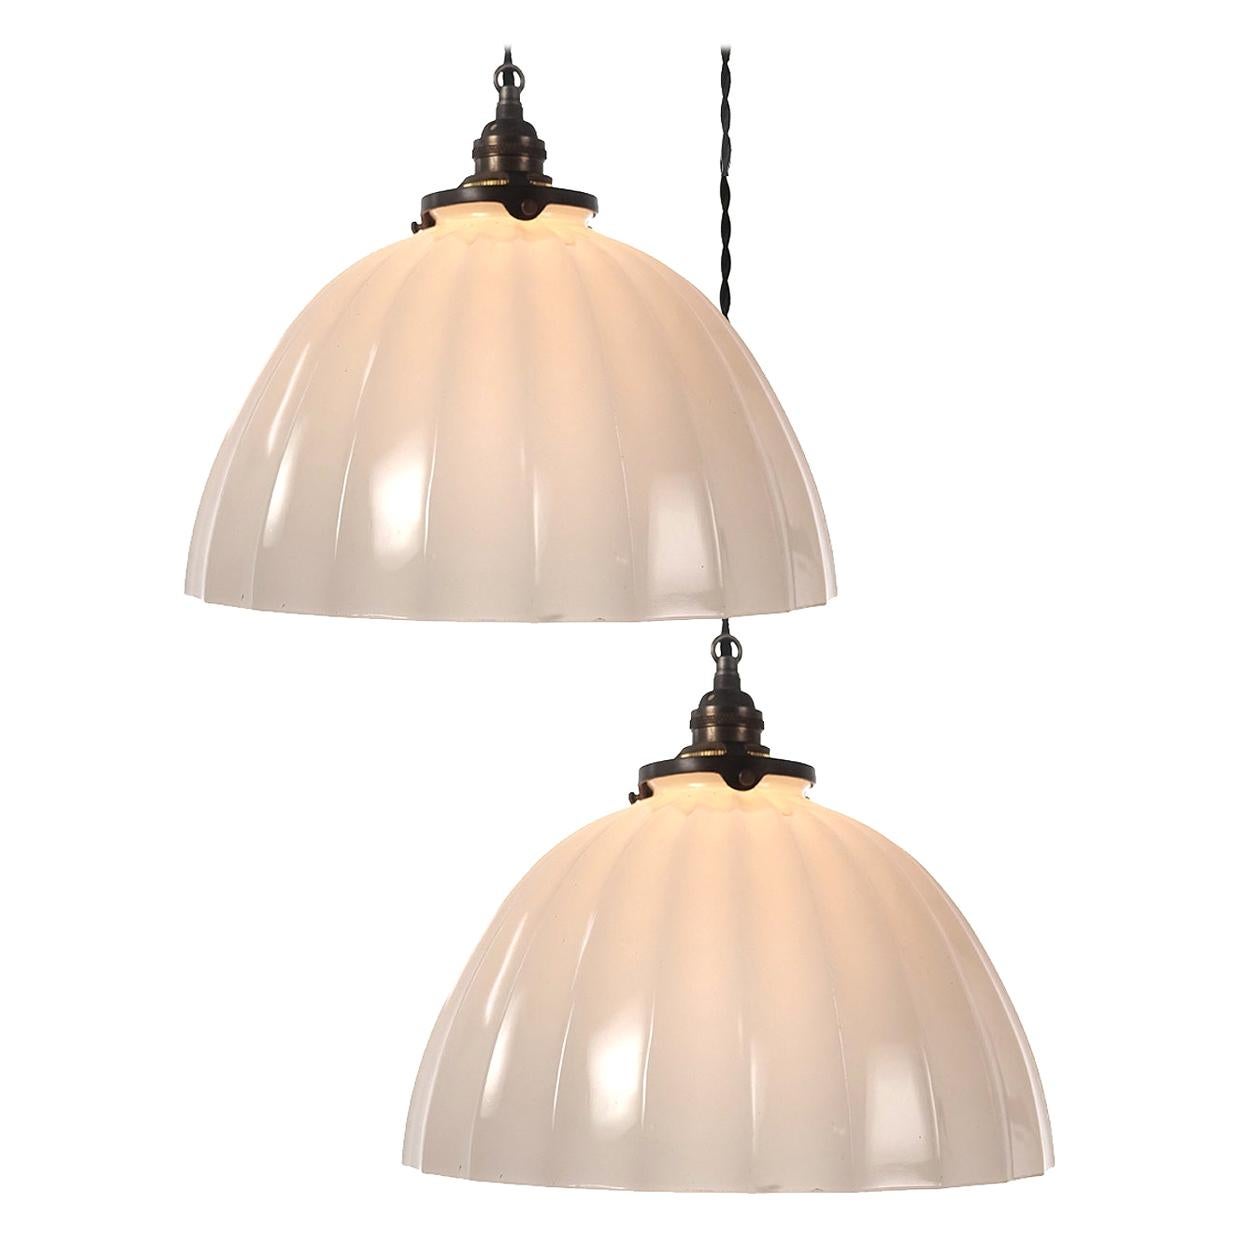 Heavy Concave Fluted Domes, Pair